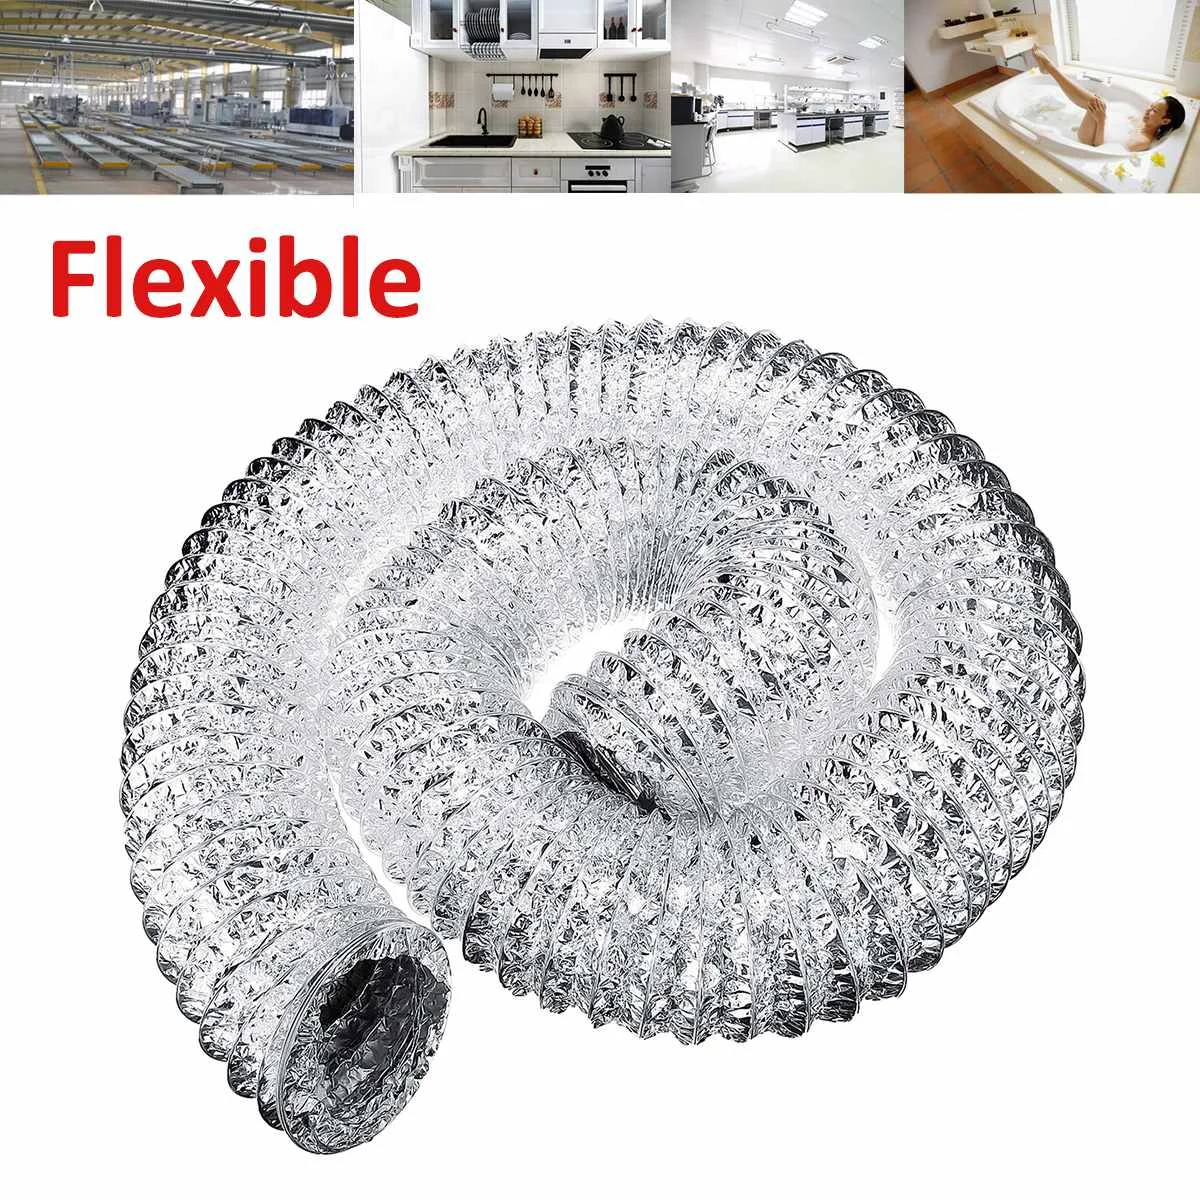 4inch 3/2 Meter Length 100mm PVC Fresh Air System Flexible Aluminum Exhaust Duct Pipe Air Ventilation Pipe Hose for Bathroom